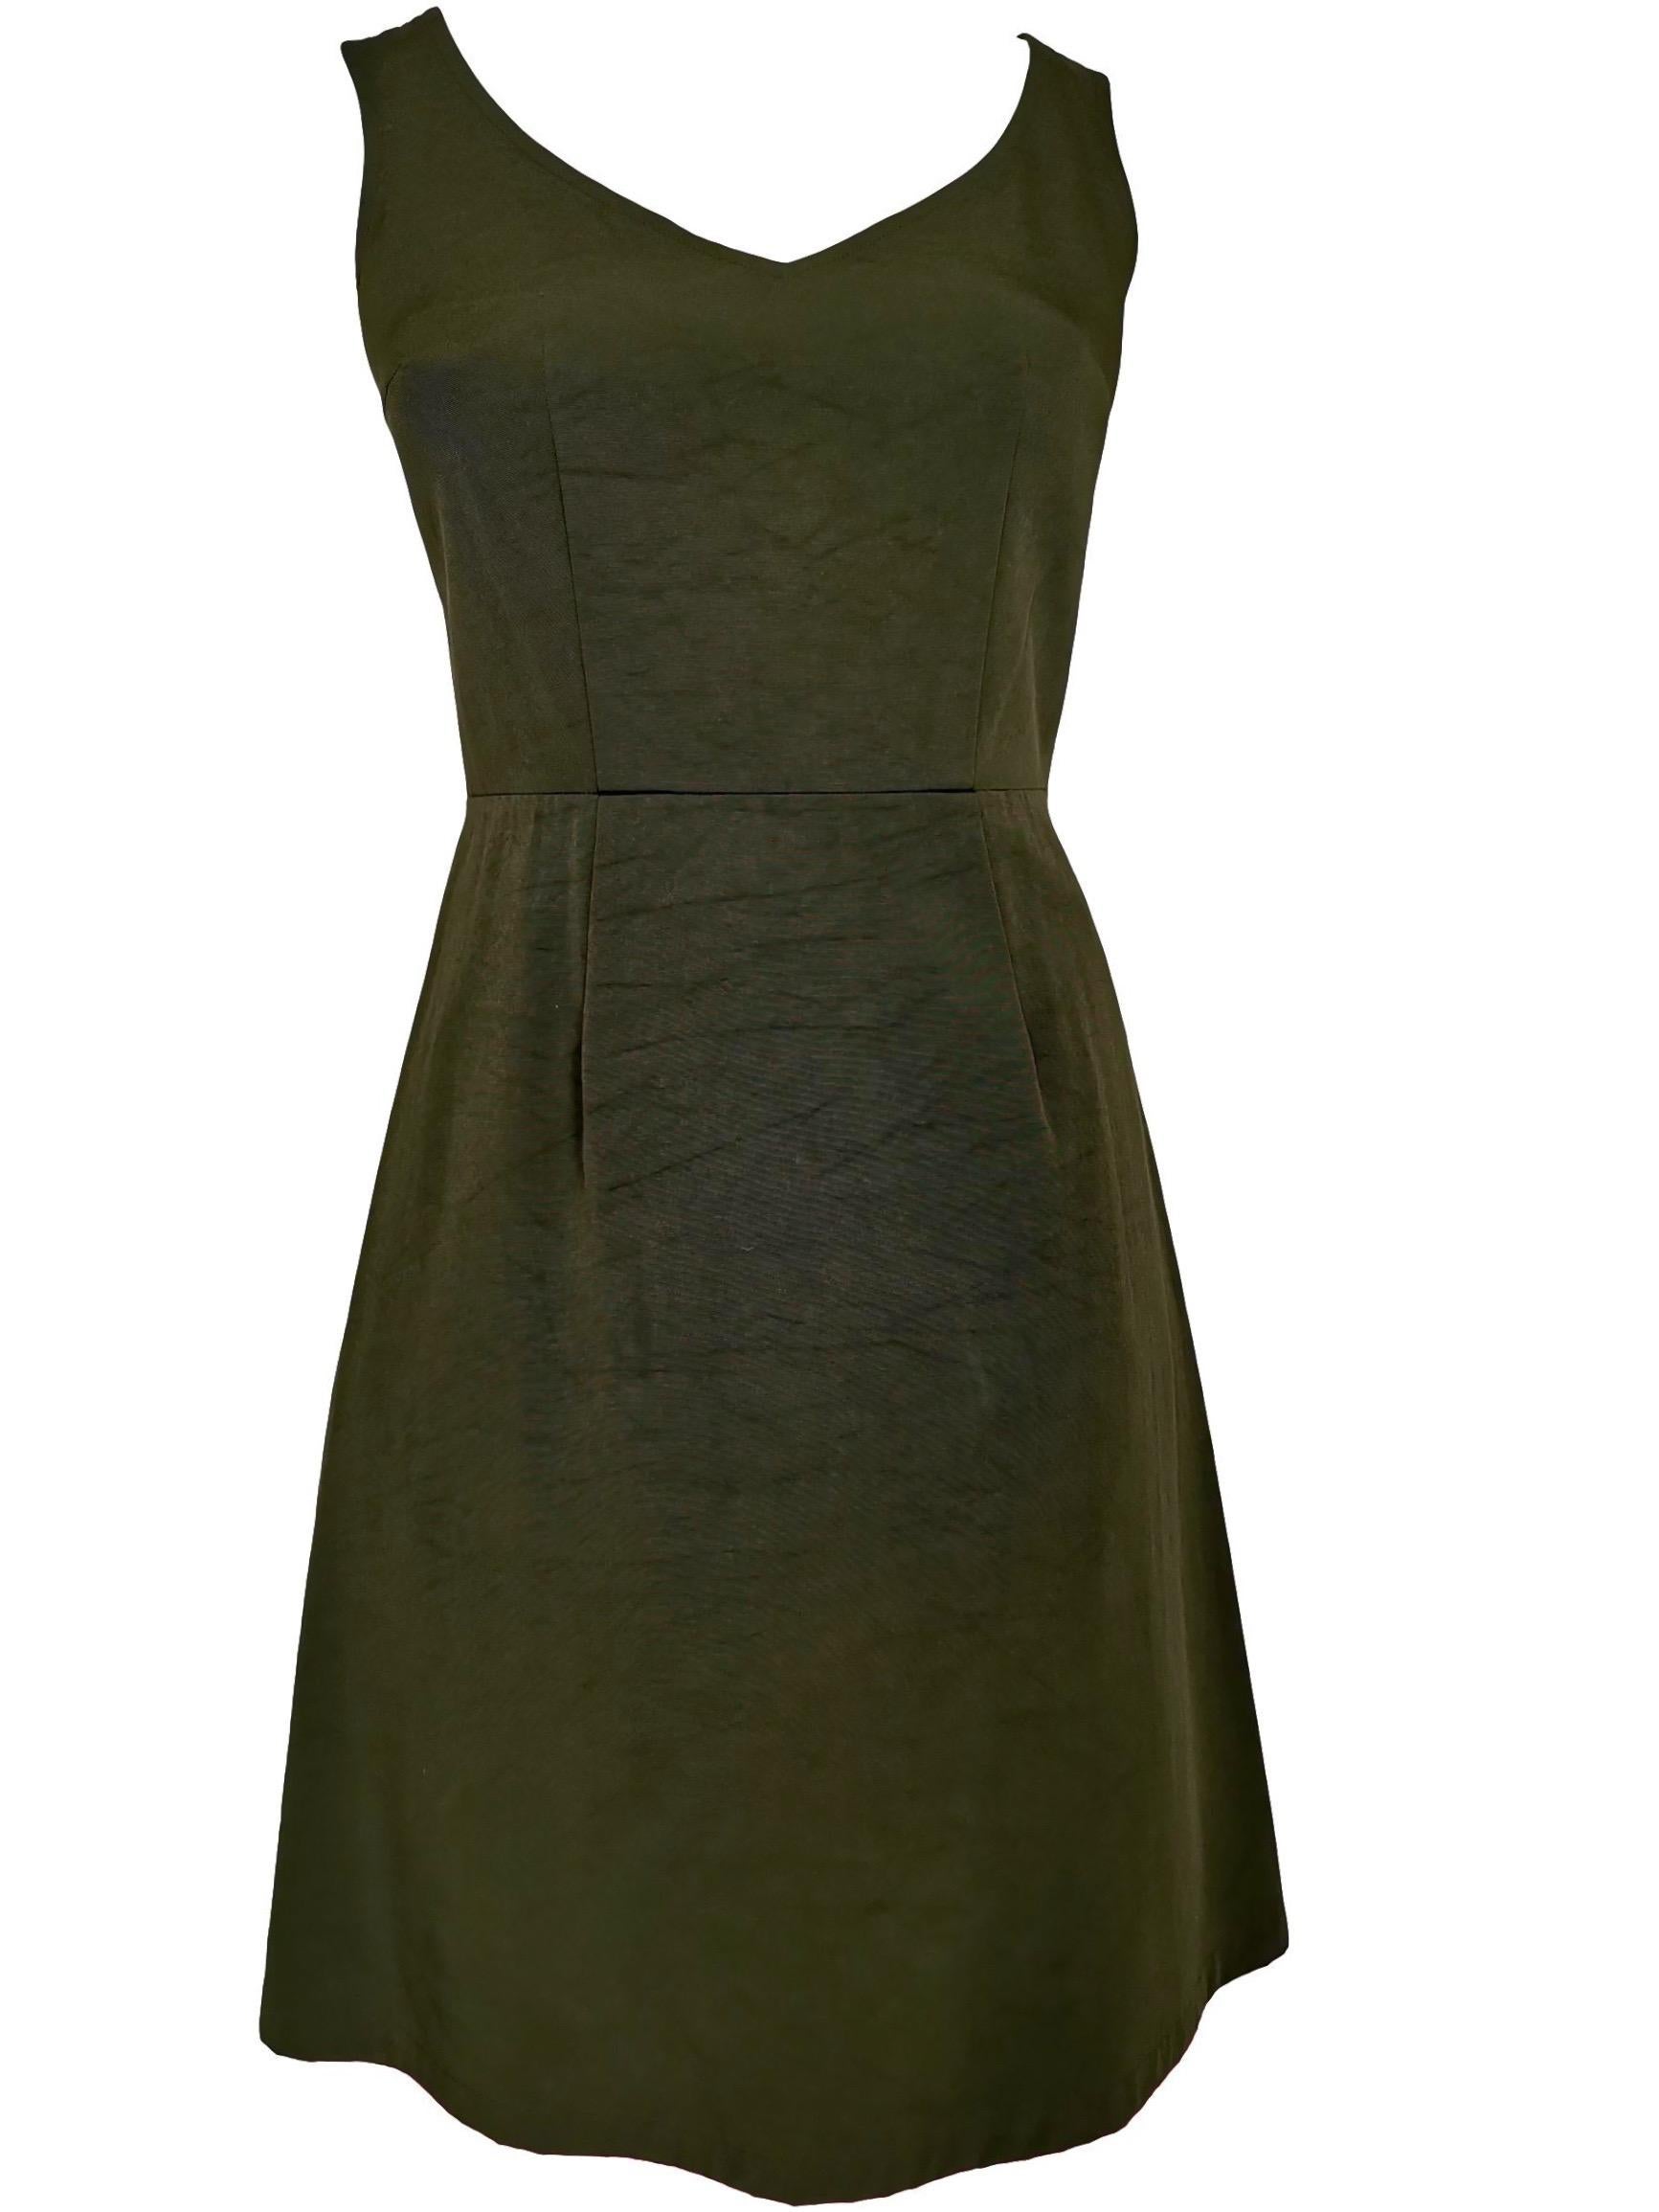 Comme des Garcons Army Green Dress AD 1999 For Sale 2